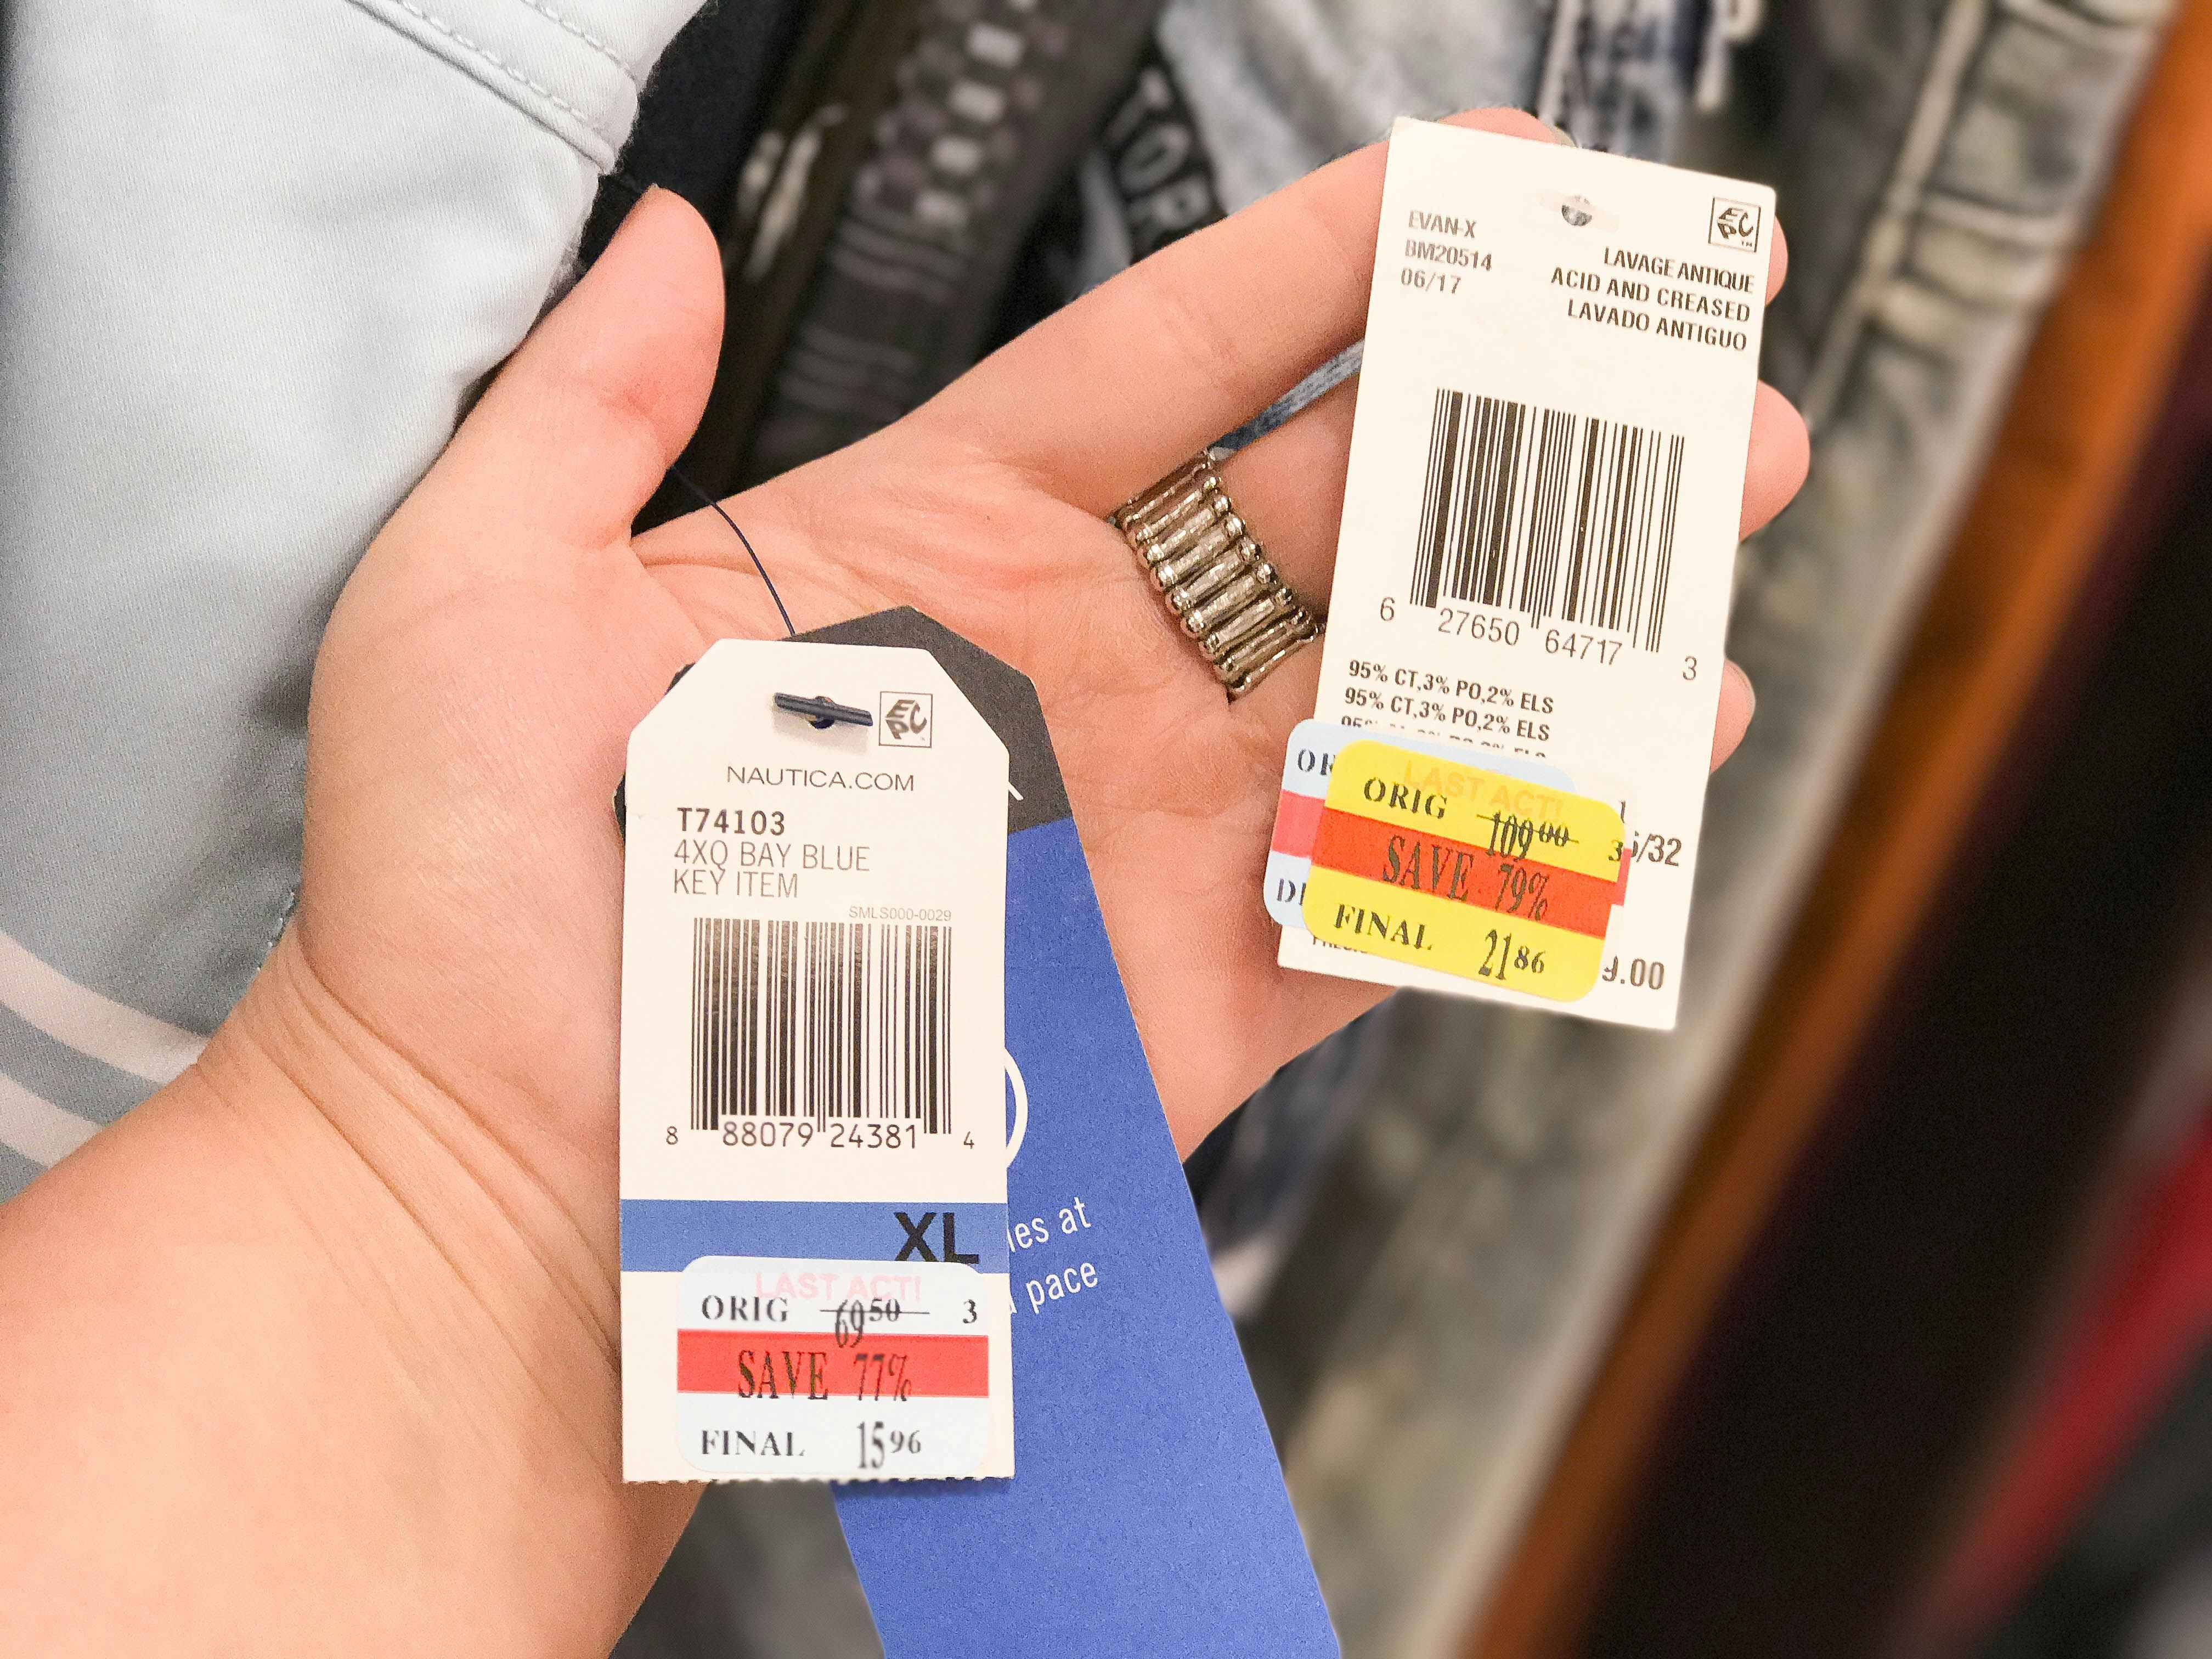 Deal: Last Act Clearance Sale at Macy's: Get an Extra 50% - 85